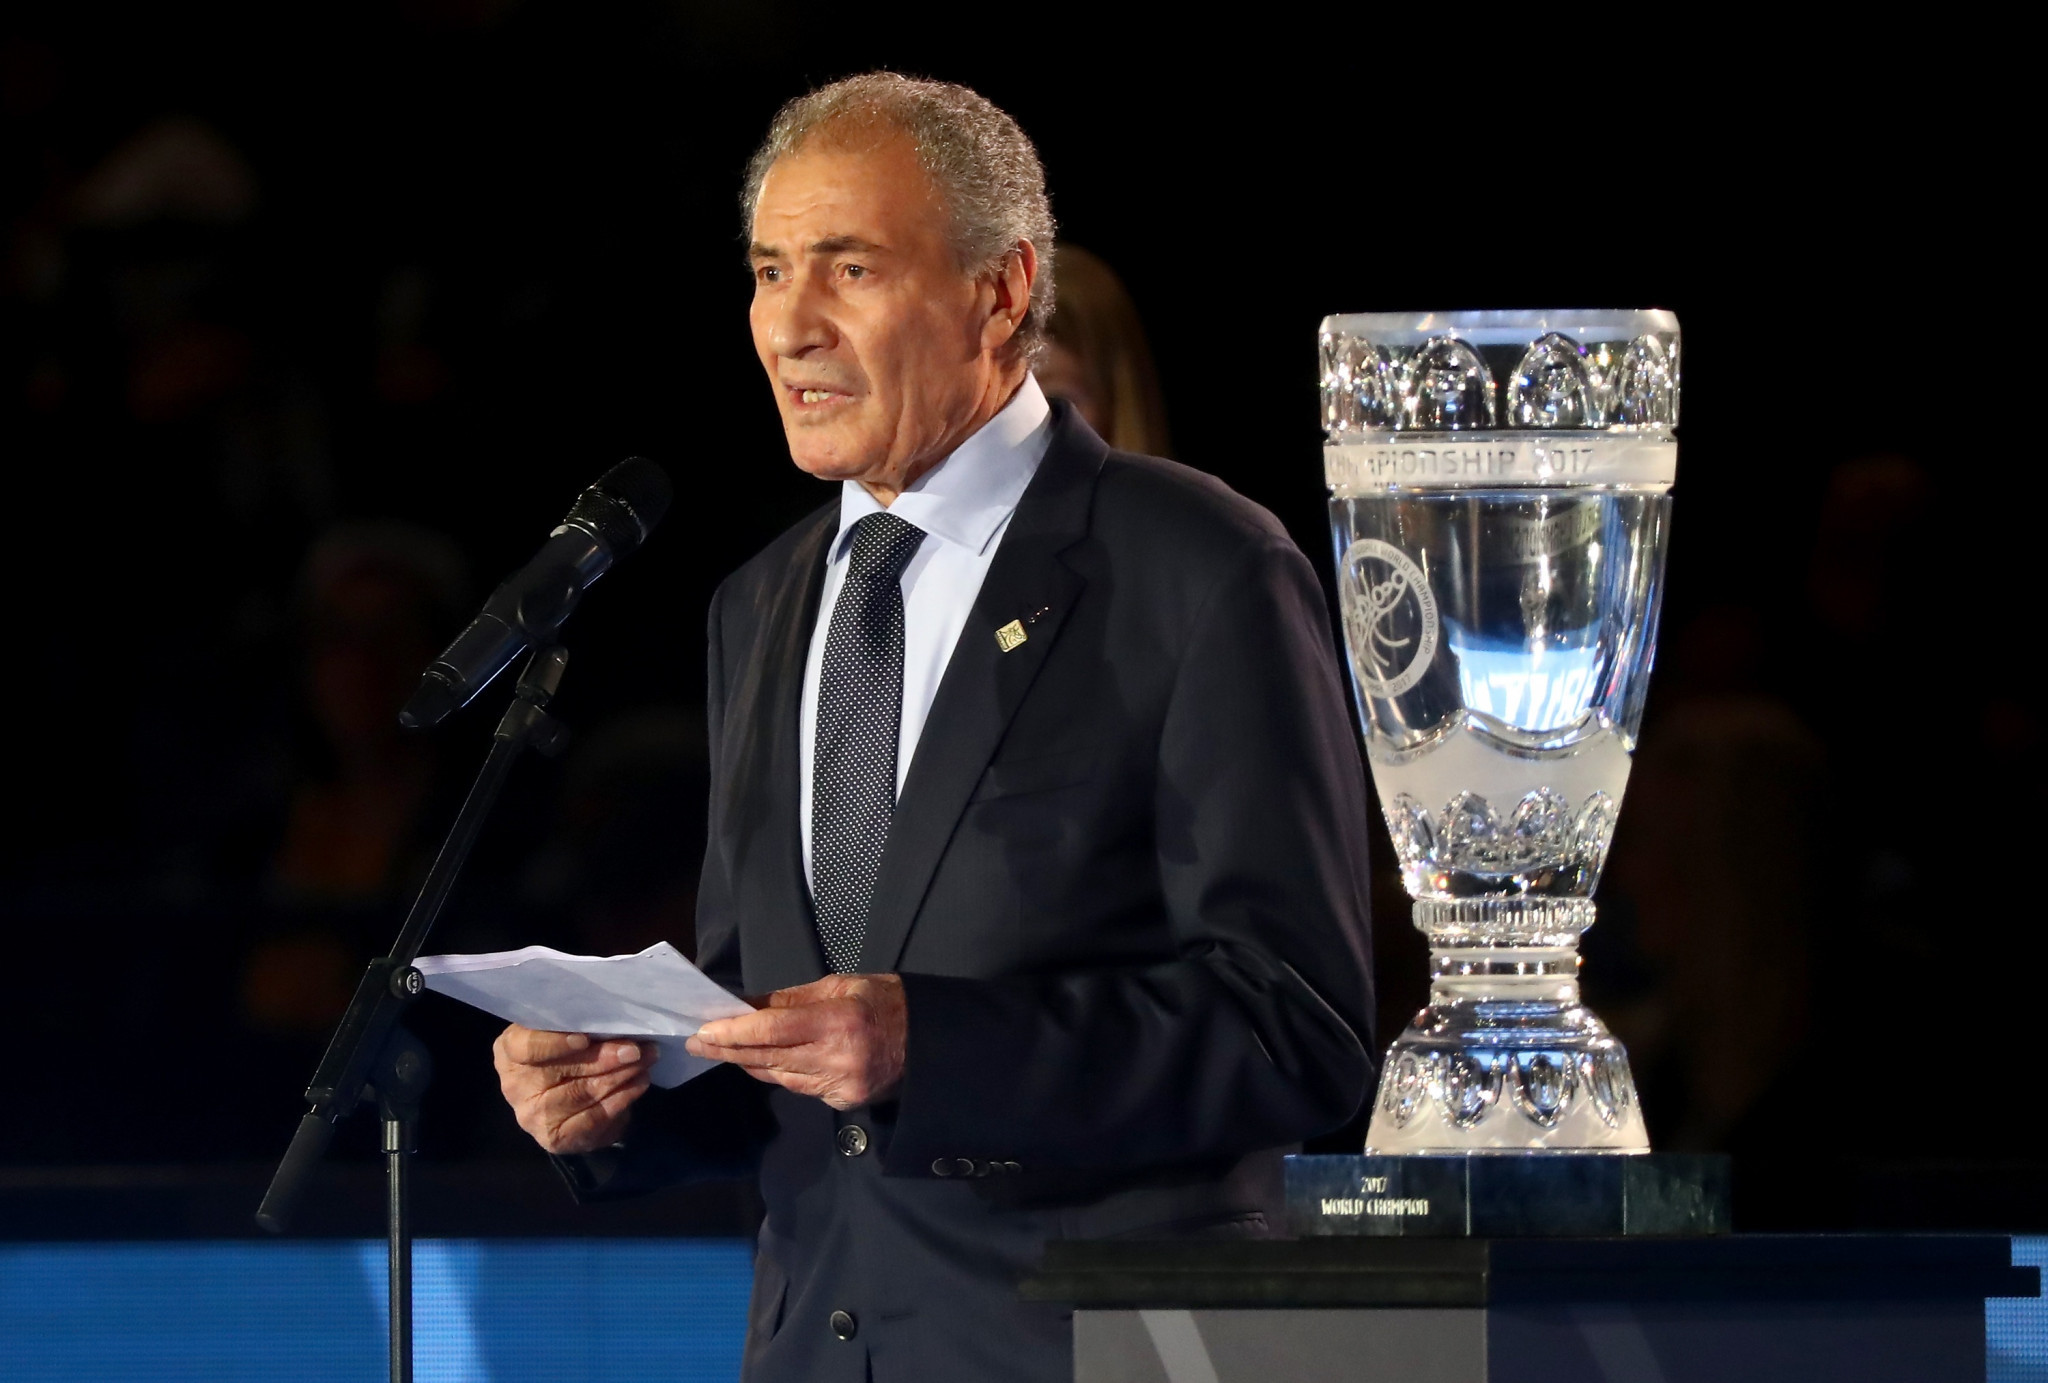 Hassan Moustafa was re-elected unopposed as President of the International Handball Federation in November, but controversy surrounded the vote ©Getty Images